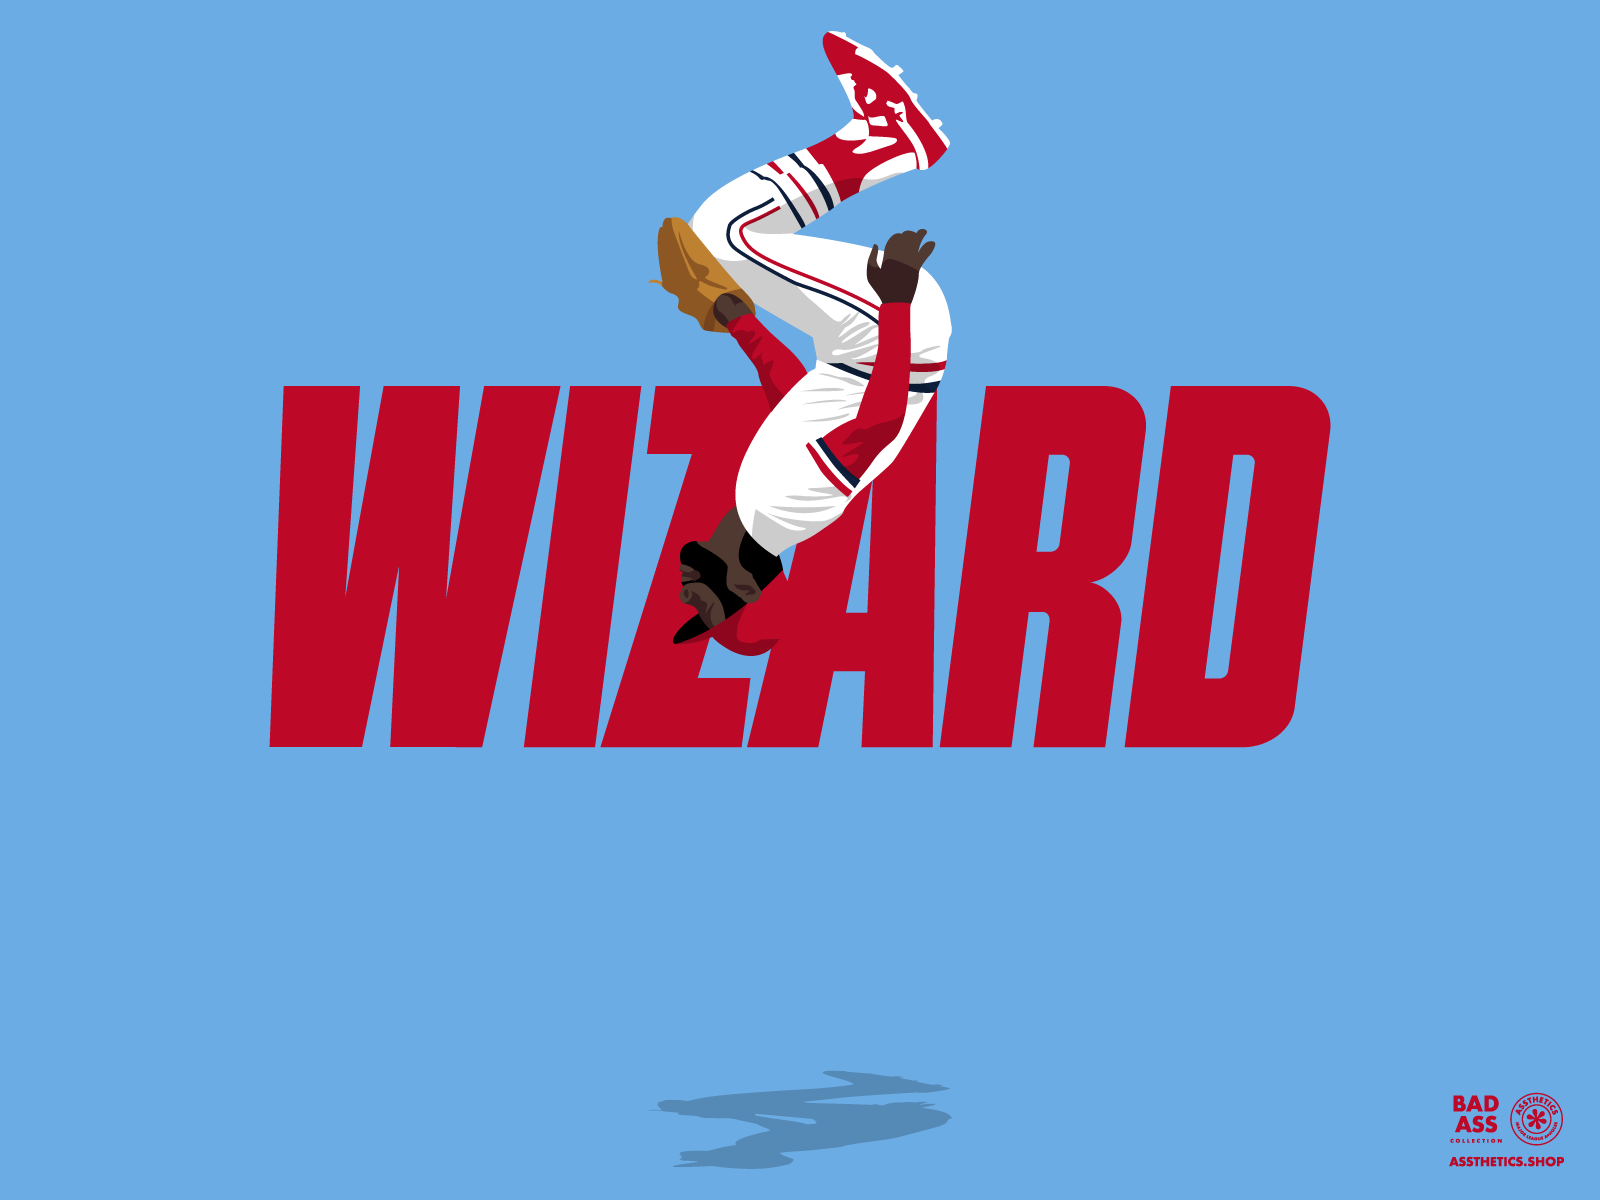 WIZARD by Ryan L. Smith on Dribbble